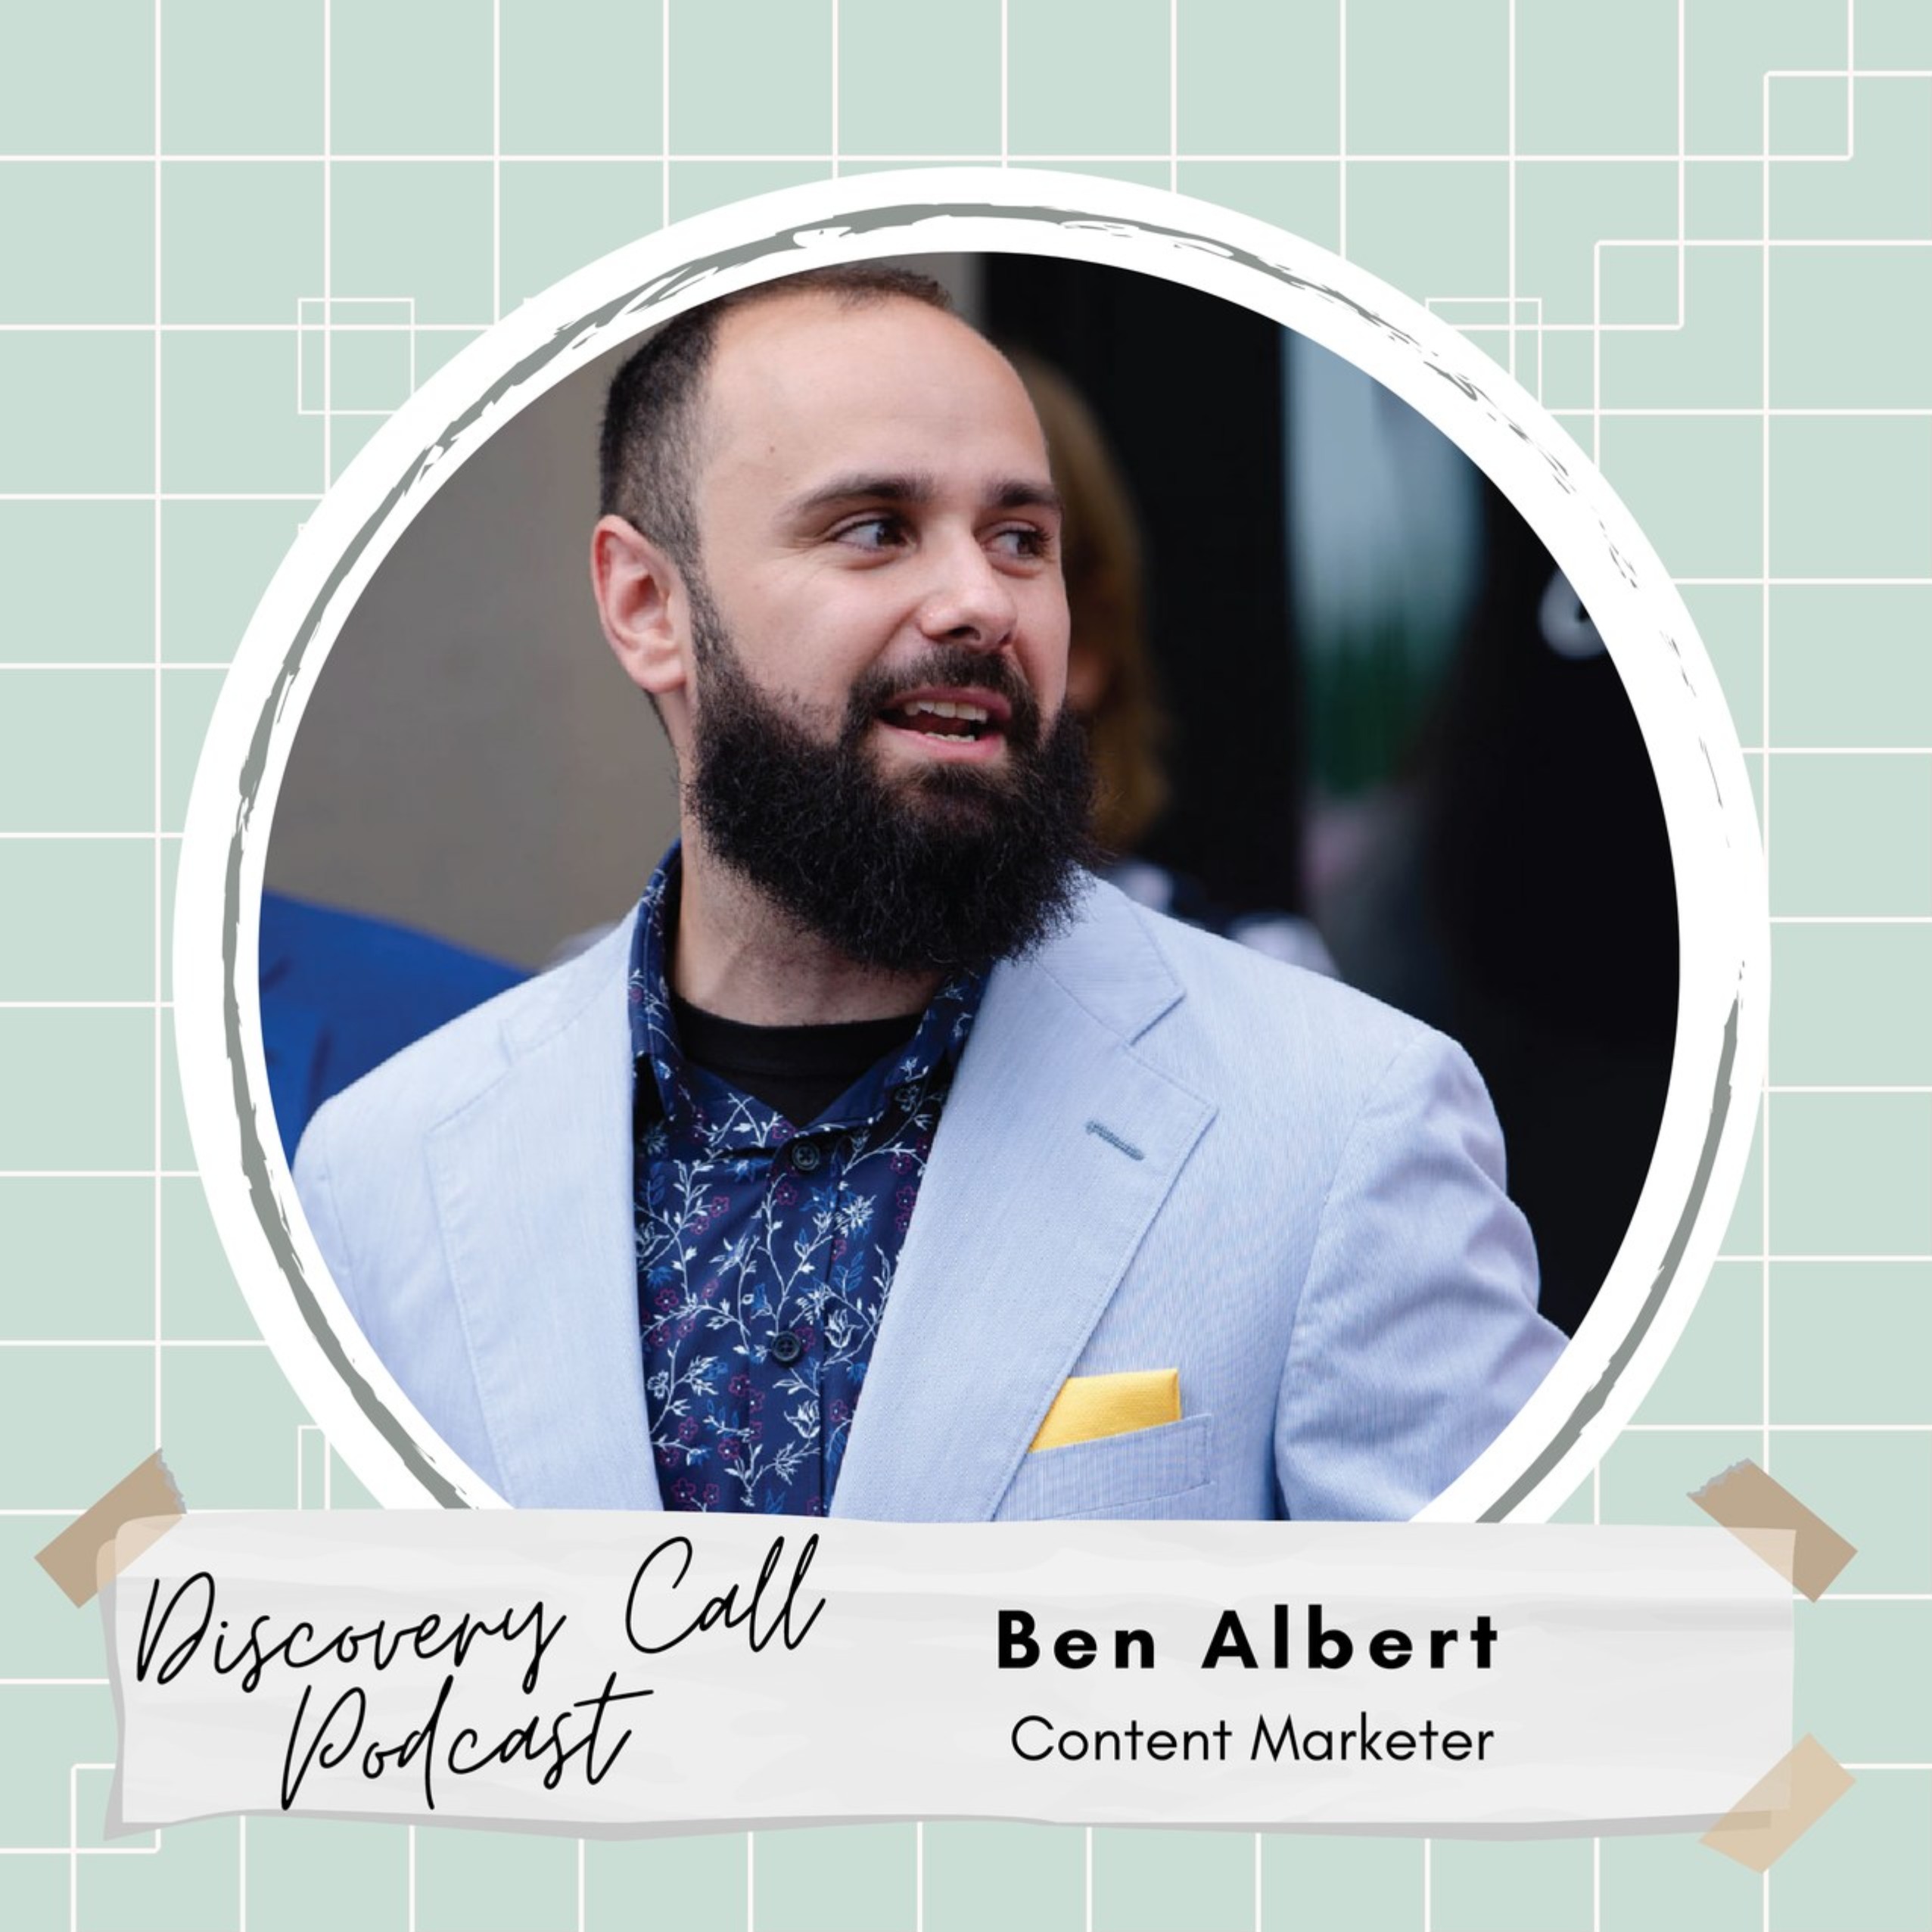 Content Marketer and Creator of the ”CAN” System | Ben Albert Image